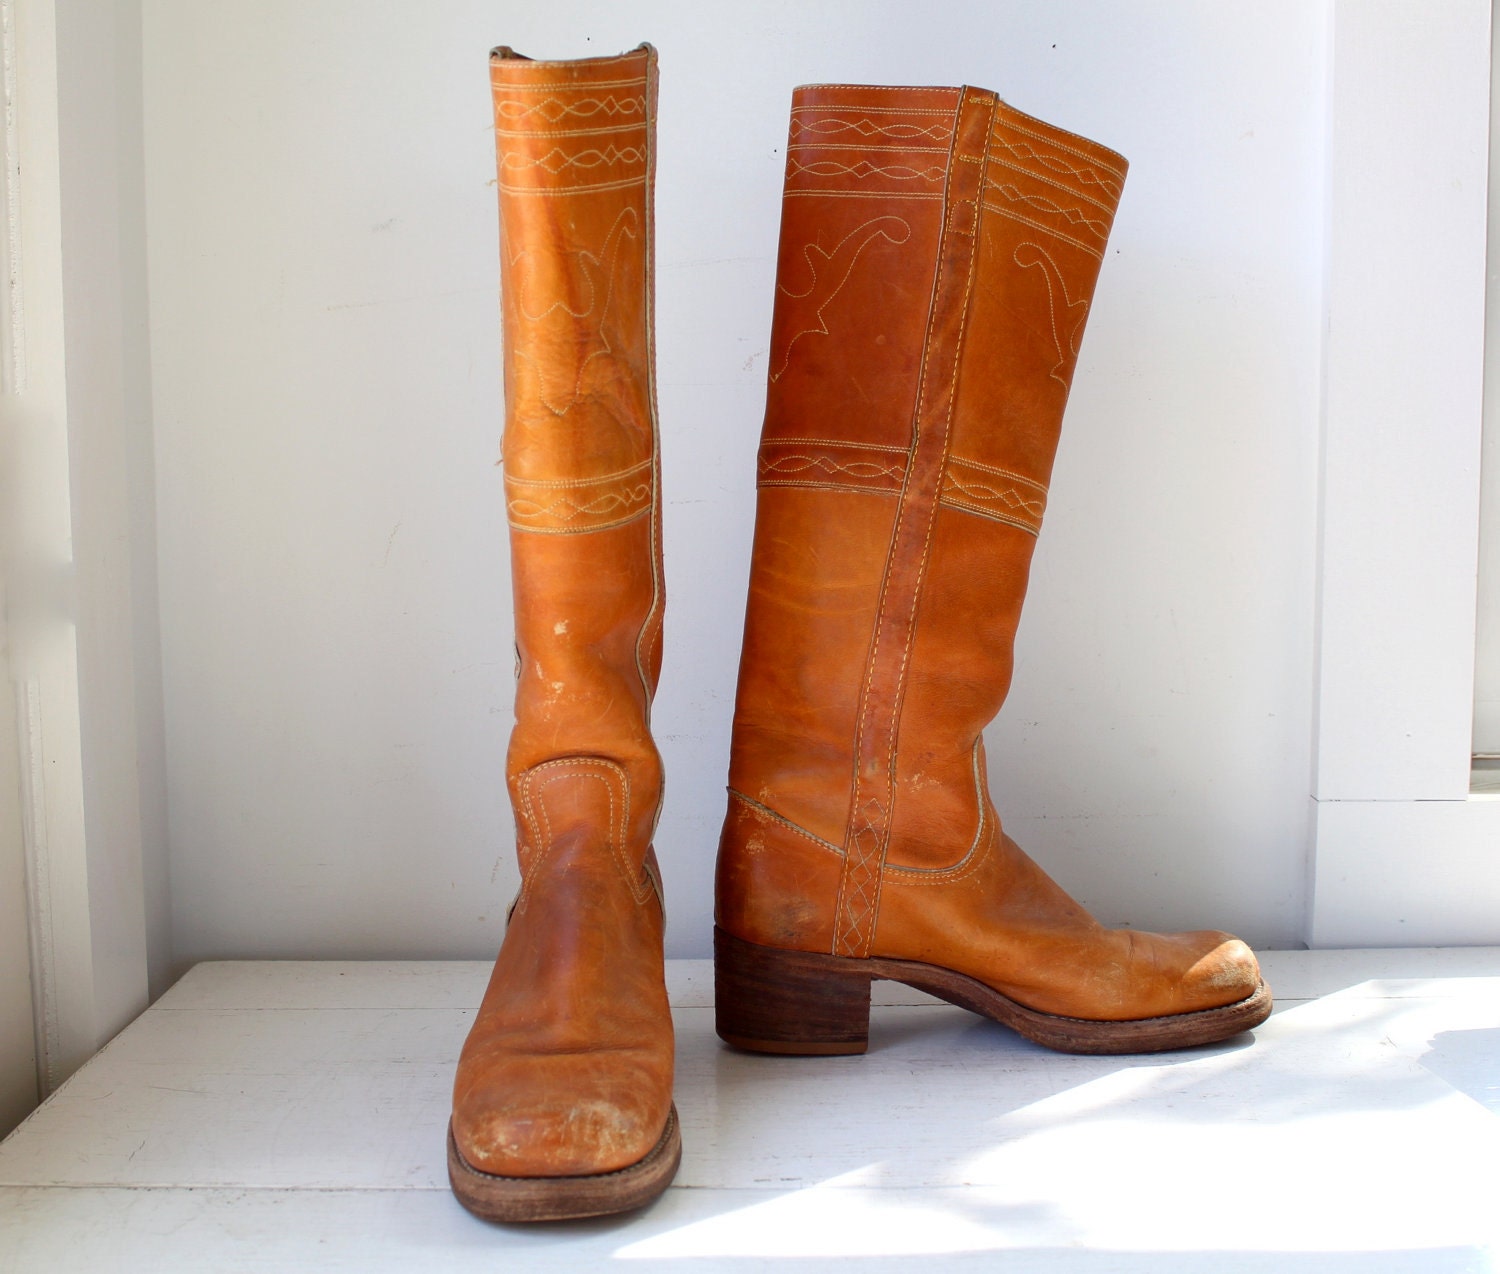 vintage 1970s Frye Campus boots. Women size 9.5 B. Stitched